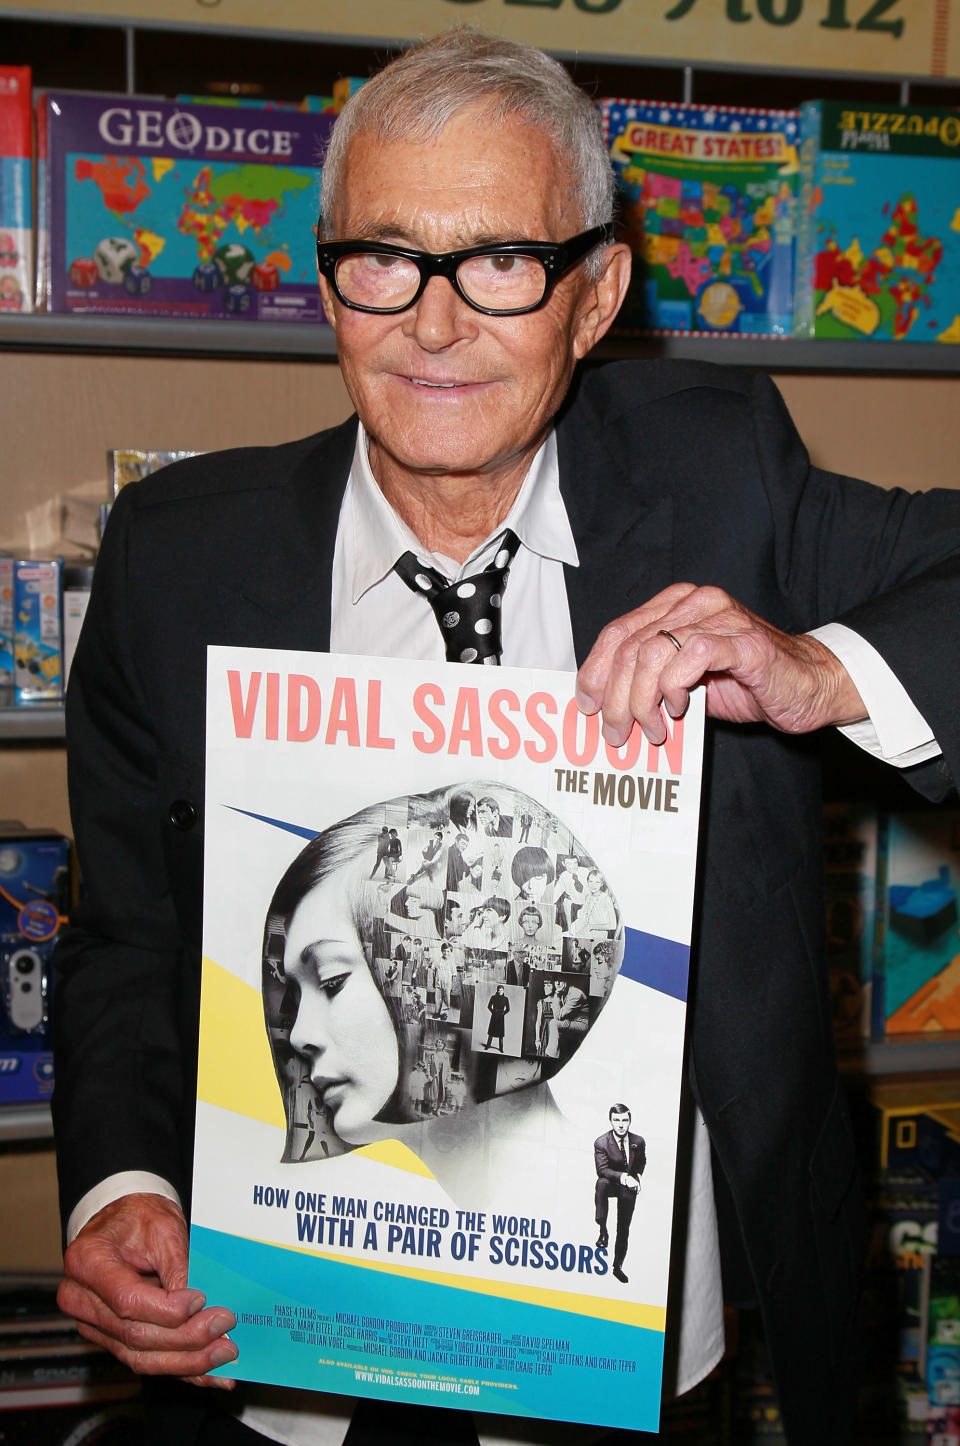 Hairstylist Vidal Sassoon attends the "Vidal Sassoon: The Movie" event at Barnes & Noble on September 6, 2011 in Santa Monica, California. (Photo by David Livingston/Getty Images)